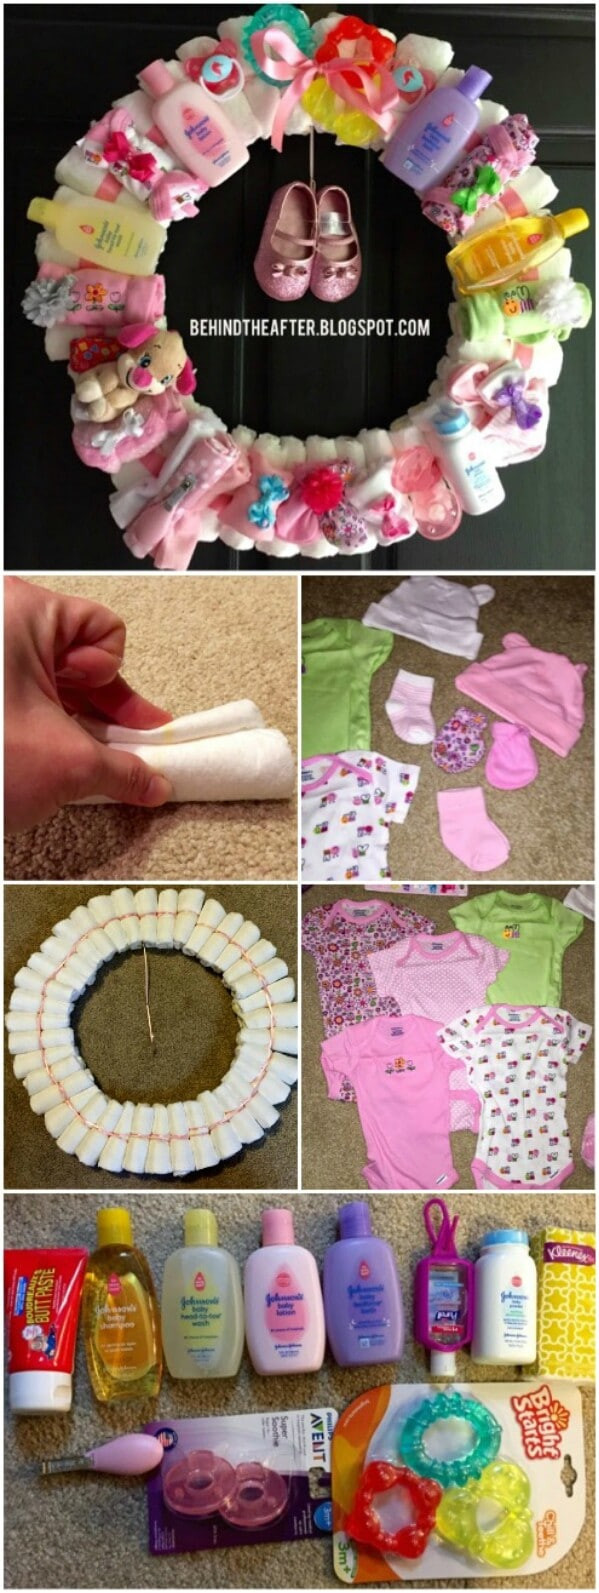 Gift Ideas From Baby
 25 Enchantingly Adorable Baby Shower Gift Ideas That Will